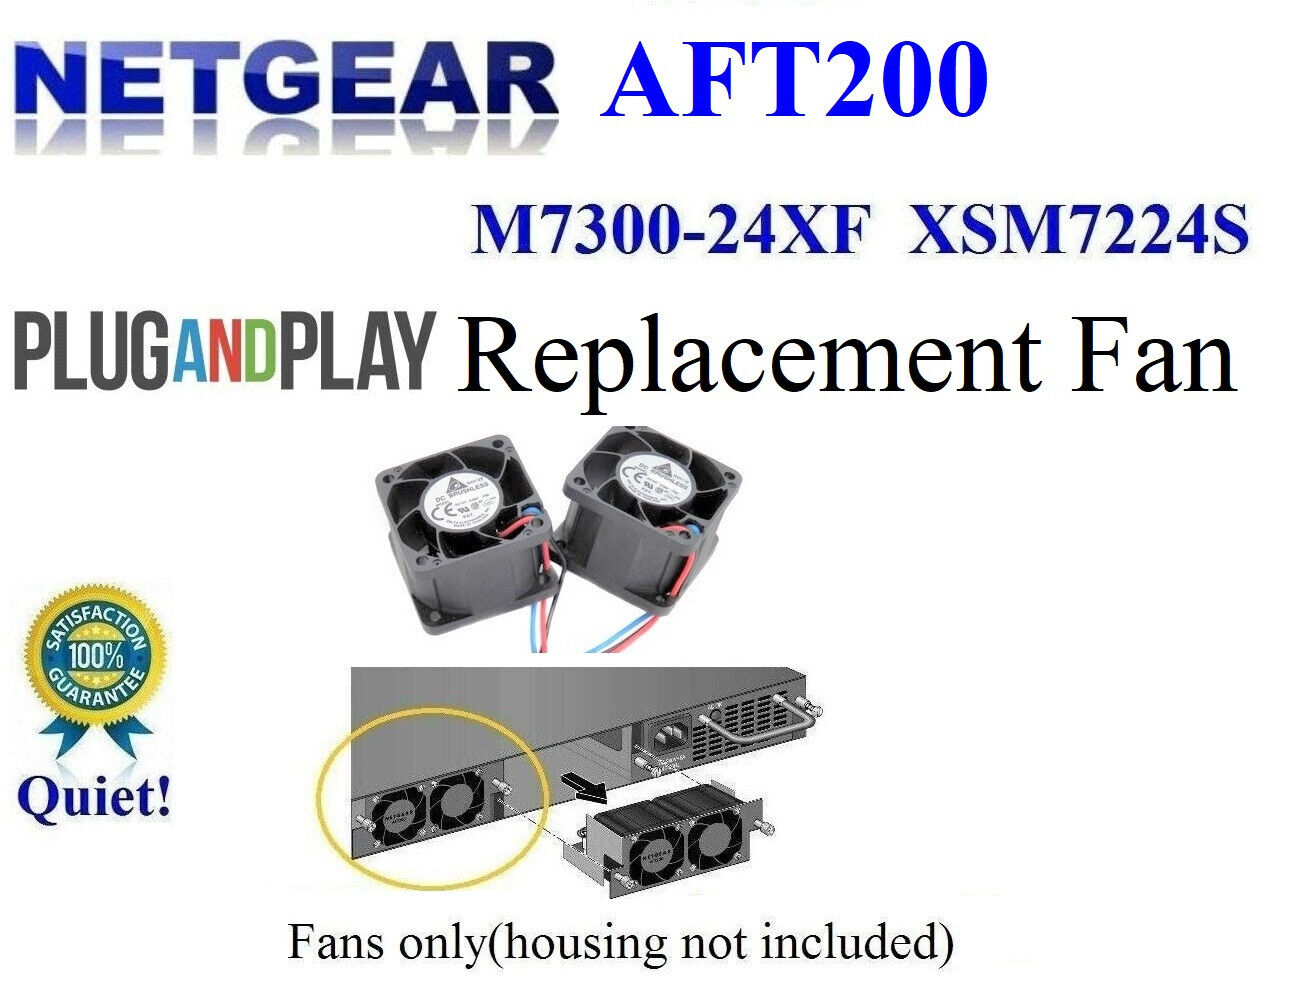 2x Quiet Version Replacement Fans only for AFT200 on Netgear ProSAFE XSM7224S